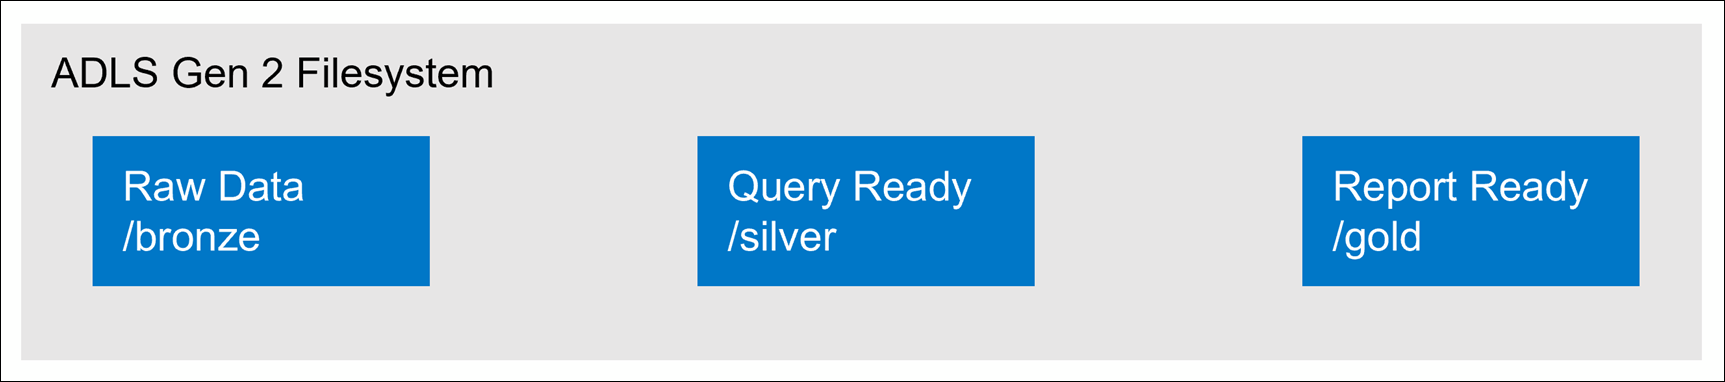 The raw data is stored in the bronze folder, query-ready data is stored in the silver folder, and report-ready data is stored in the gold folder.